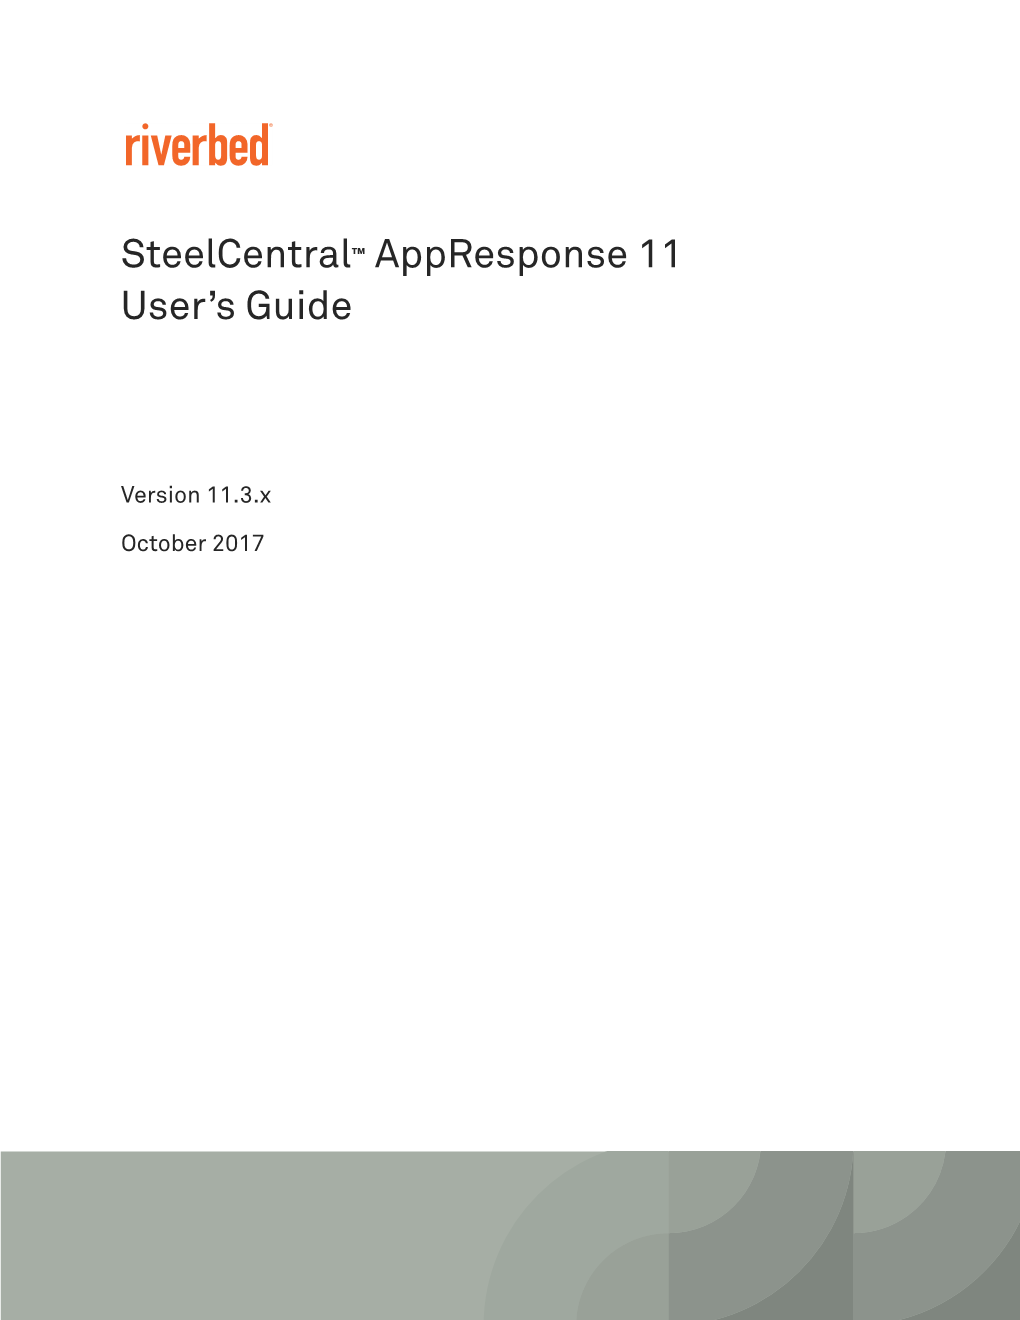 Steelcentral™ Appresponse 11 User's Guide